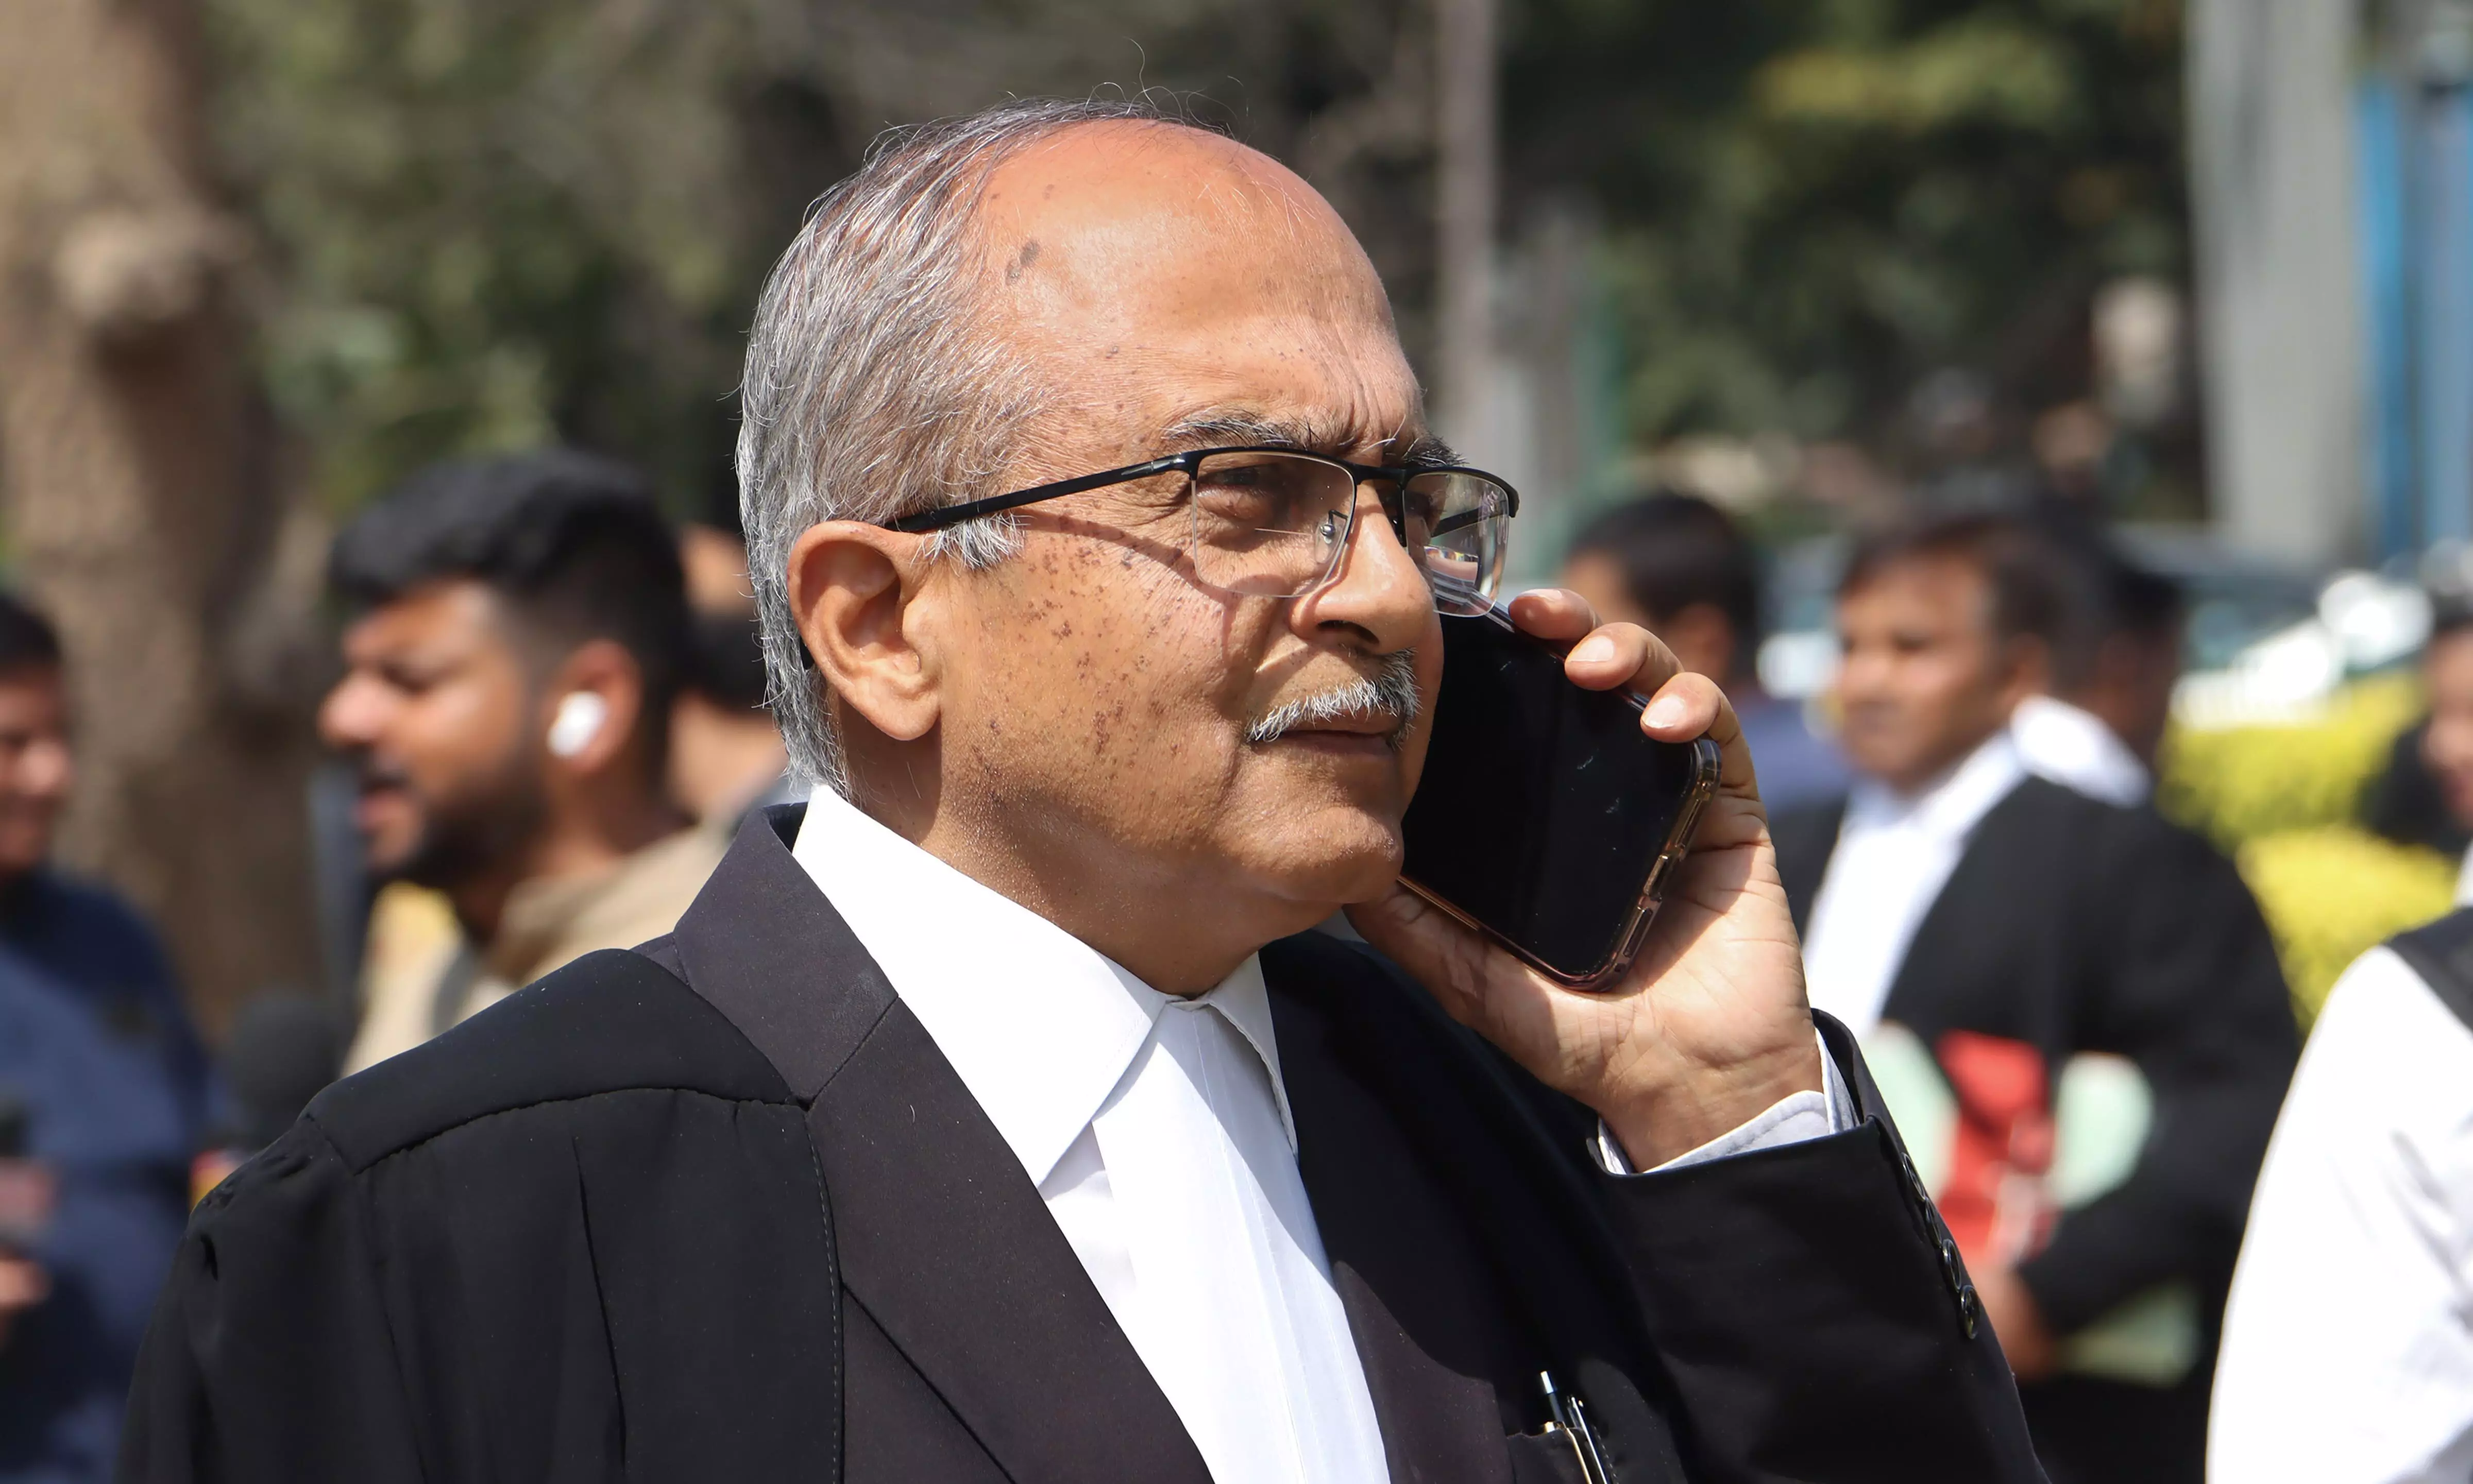 Accountability needs to be fixed in electoral bonds scam: Prashant Bhushan